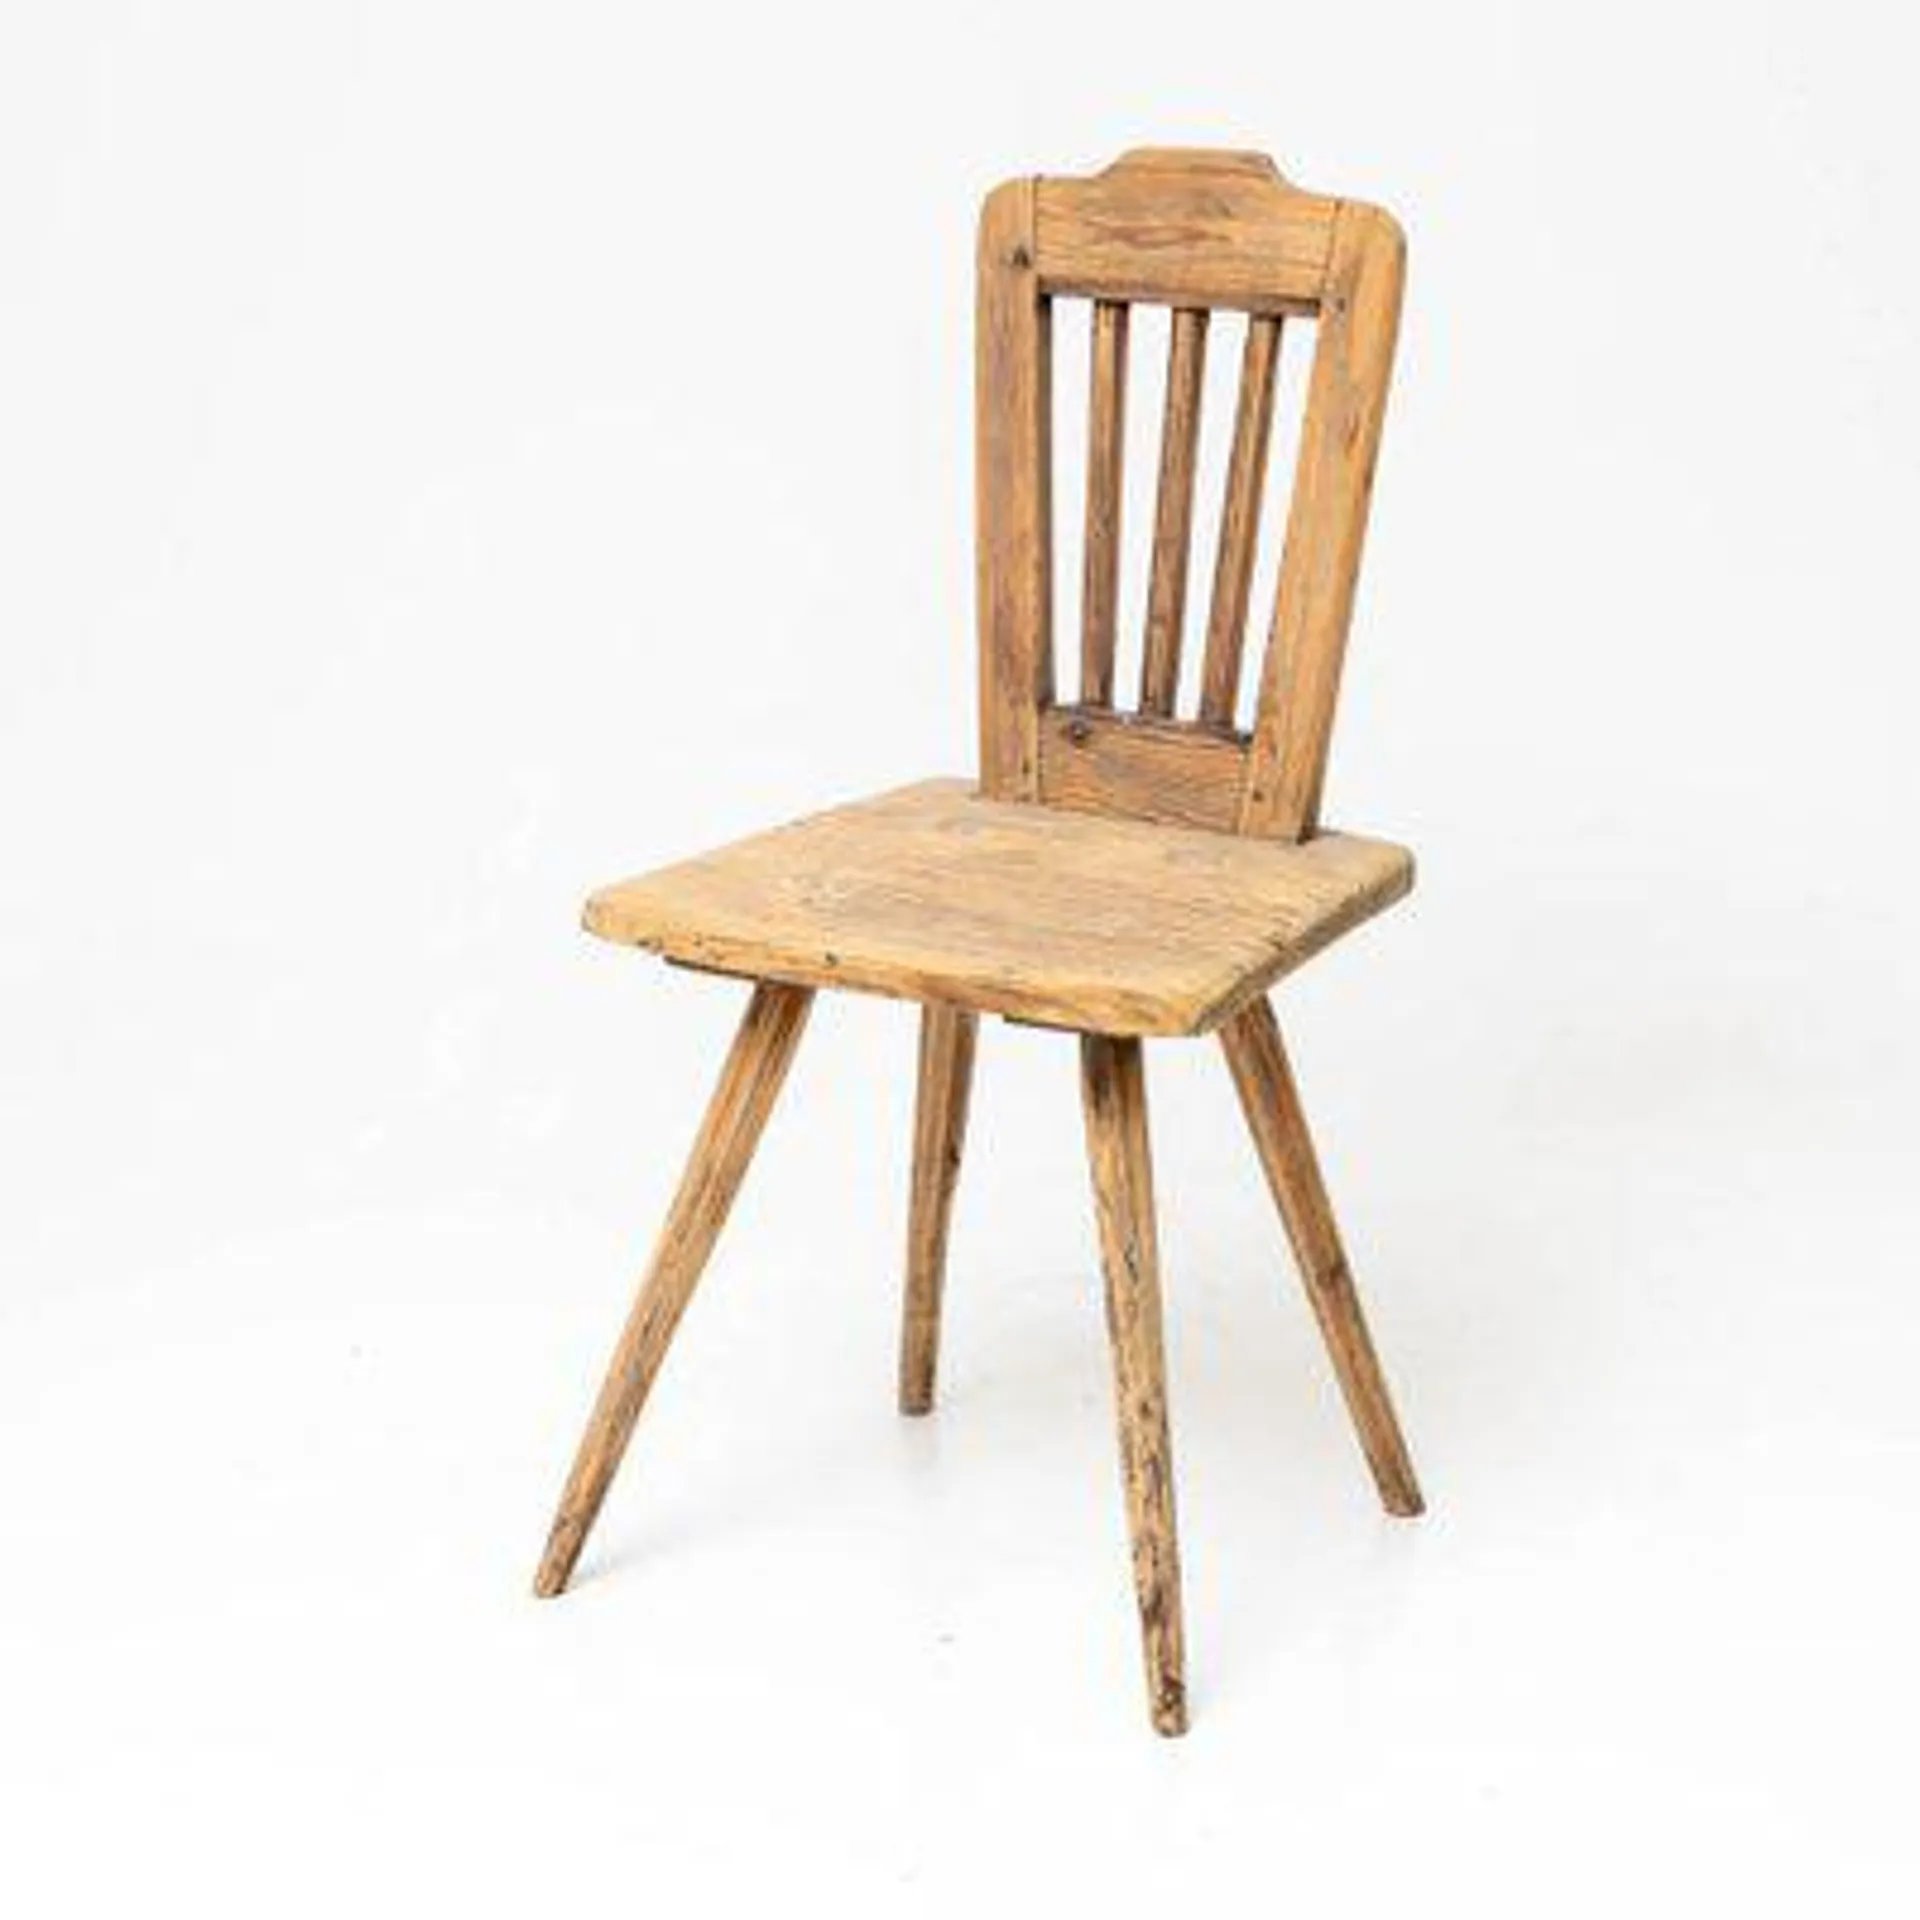 Rustic Softwood Chairs, 1800s, Set of 2